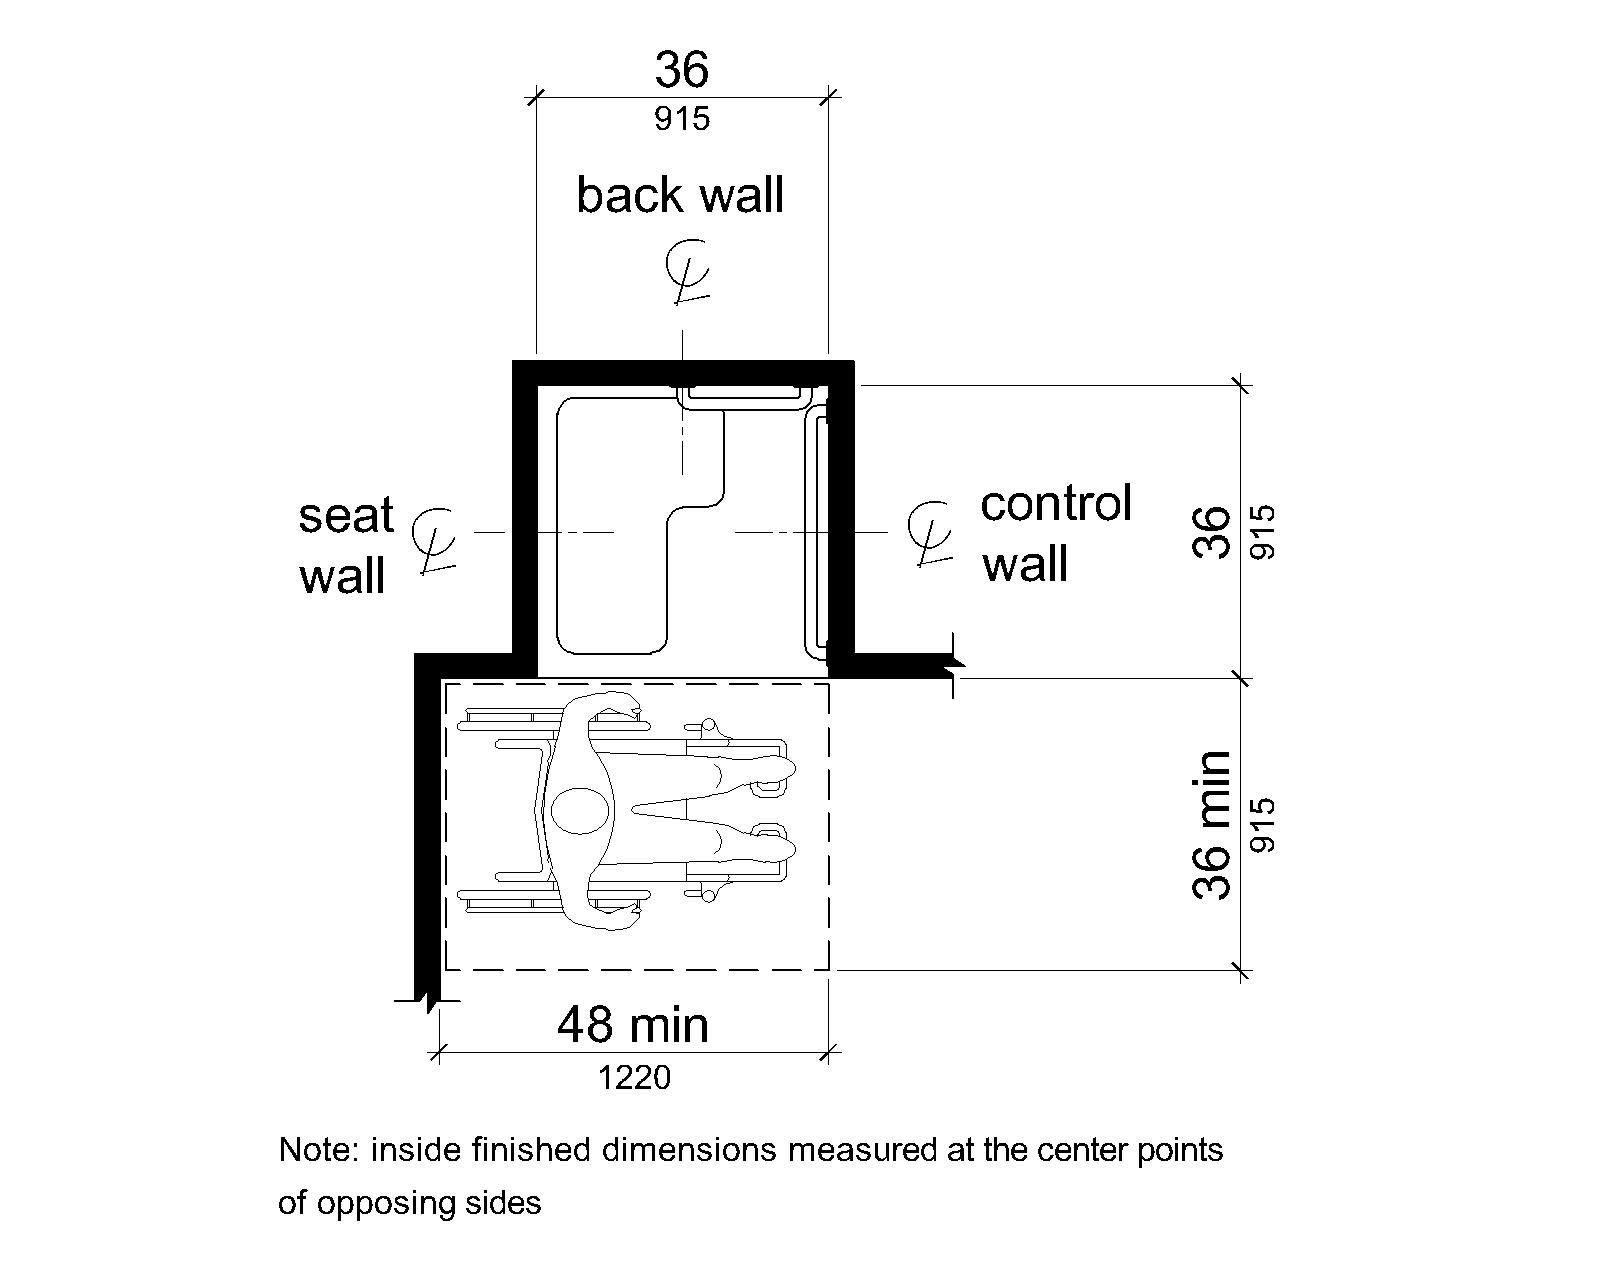 A transfer stall is shown in plan view to be 36 by 36 inches (915 by 915 mm). Clear deck space in front is 36 inches (915 mm) wide minimum and 48 inches (1220 mm) long minimum measured from the control wall.